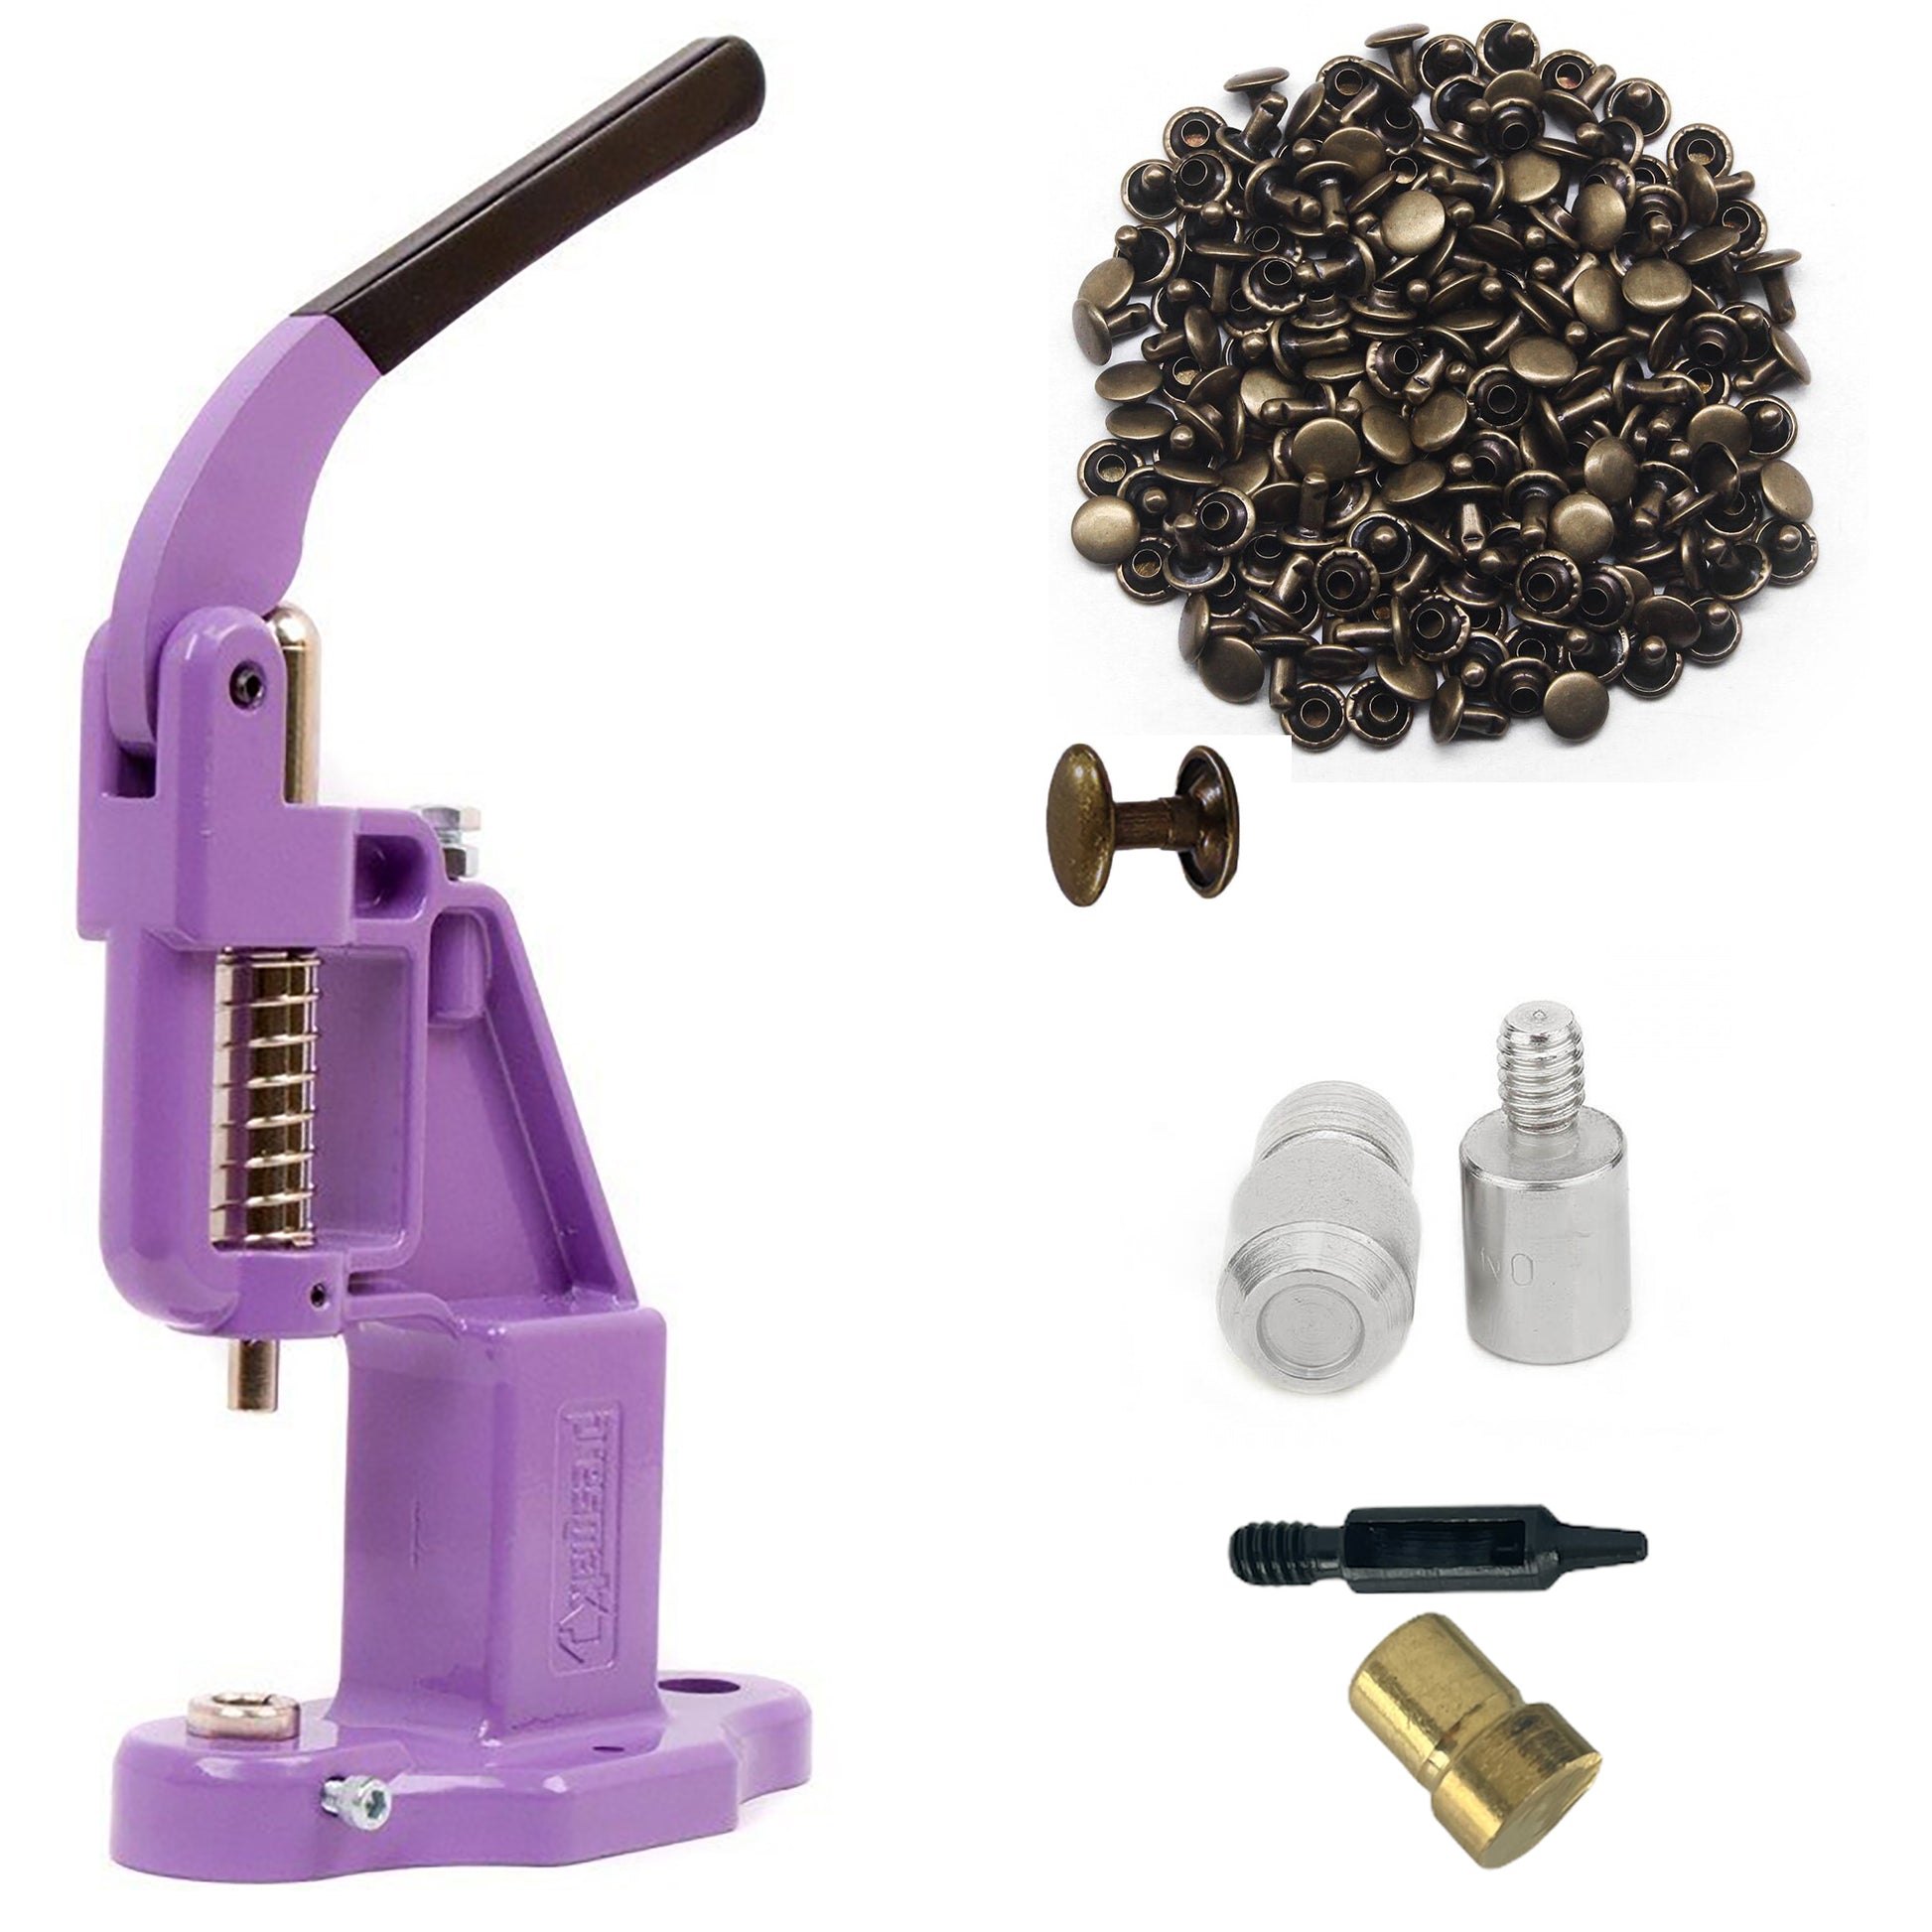 Double Cap 9mm Rivets Kit (1000 pcs) with Hand Press Machine, Dies and Hole Punch - Hobby Trendy